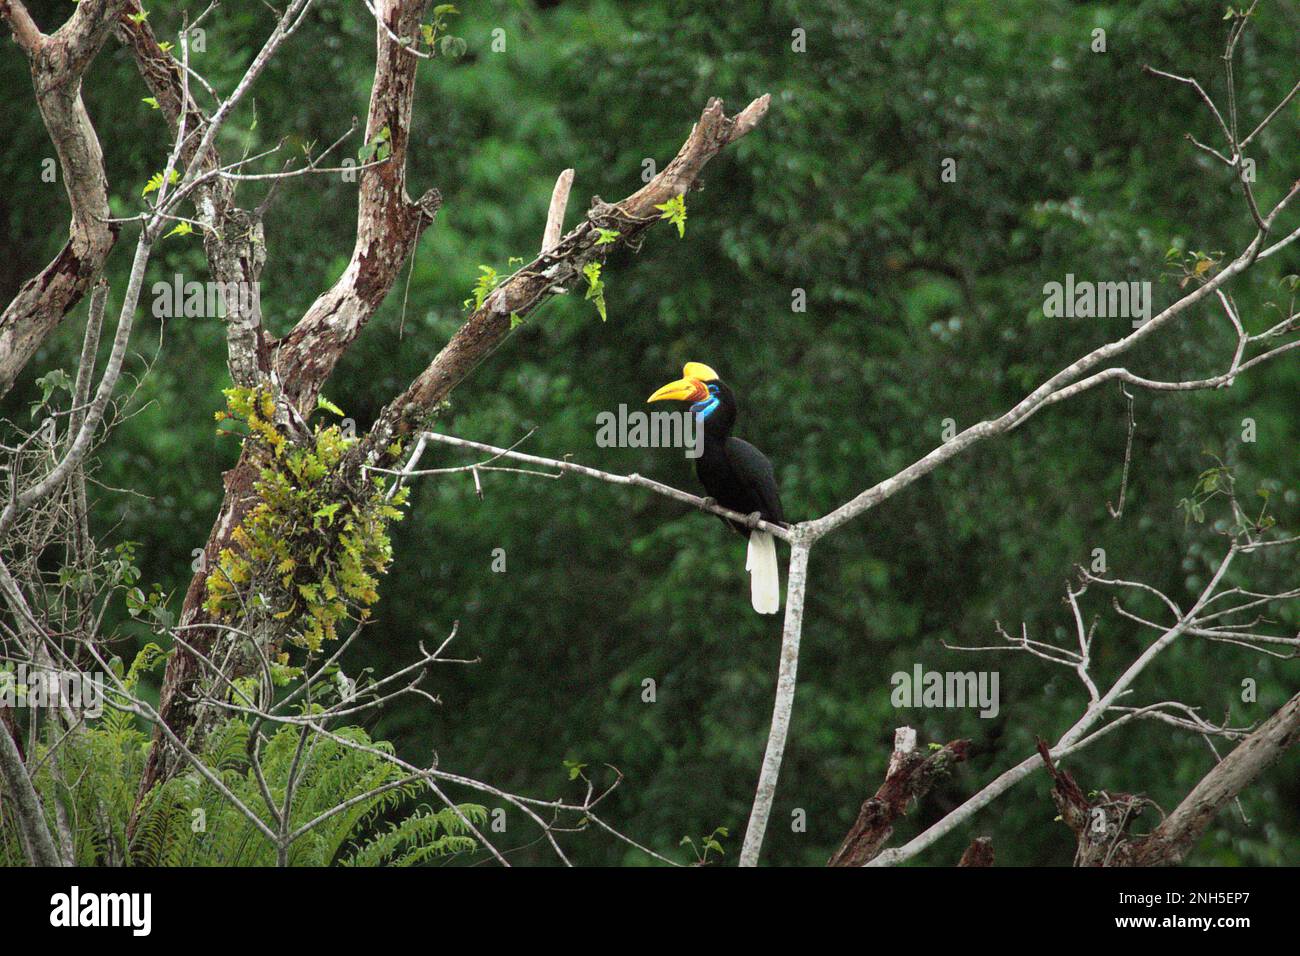 A female individual of knobbed hornbill, or sometimes called A female individual of knobbed hornbill, or sometimes called Sulawesi wrinkled hornbill (Rhyticeros cassidix), is perching on a branch of a tree in a rainforest area near Mount Tangkoko and DuaSudara in Bitung, North Sulawesi, Indonesia. Due to their dependency on forest and certain types of trees, hornbills in general are threatened by climate change. Stock Photo